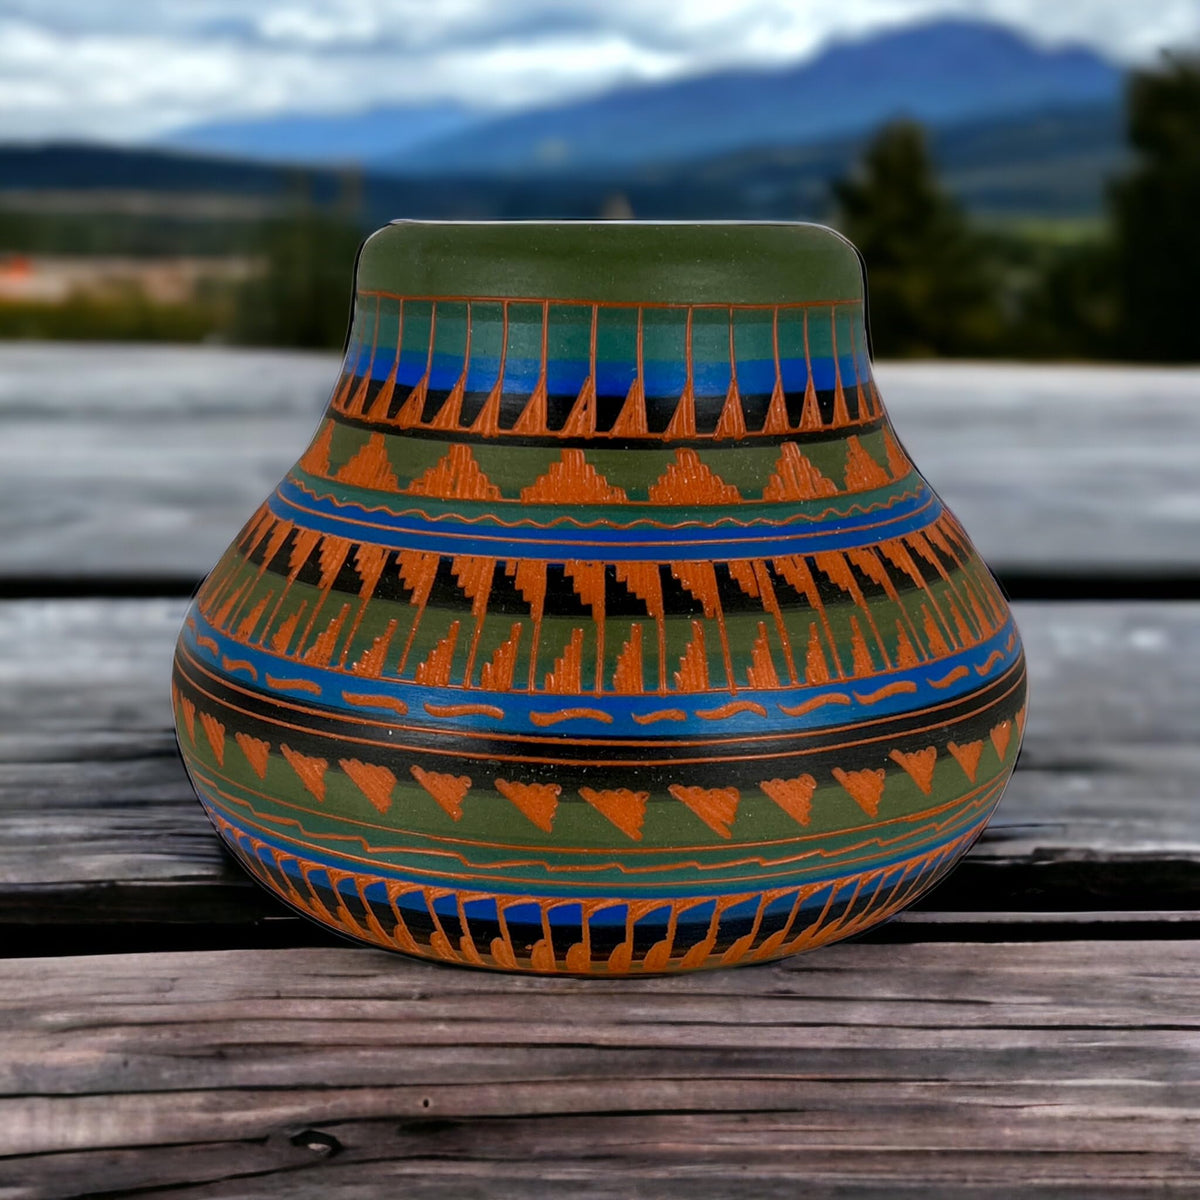 Authentic Native American Pottery, Small Traditional Vase Style Pot, Genuine Navajo Tribe USA Hand Painted, Artist Signed, Southwestern Home Decor Collectible, Rustic Handmade Decoration